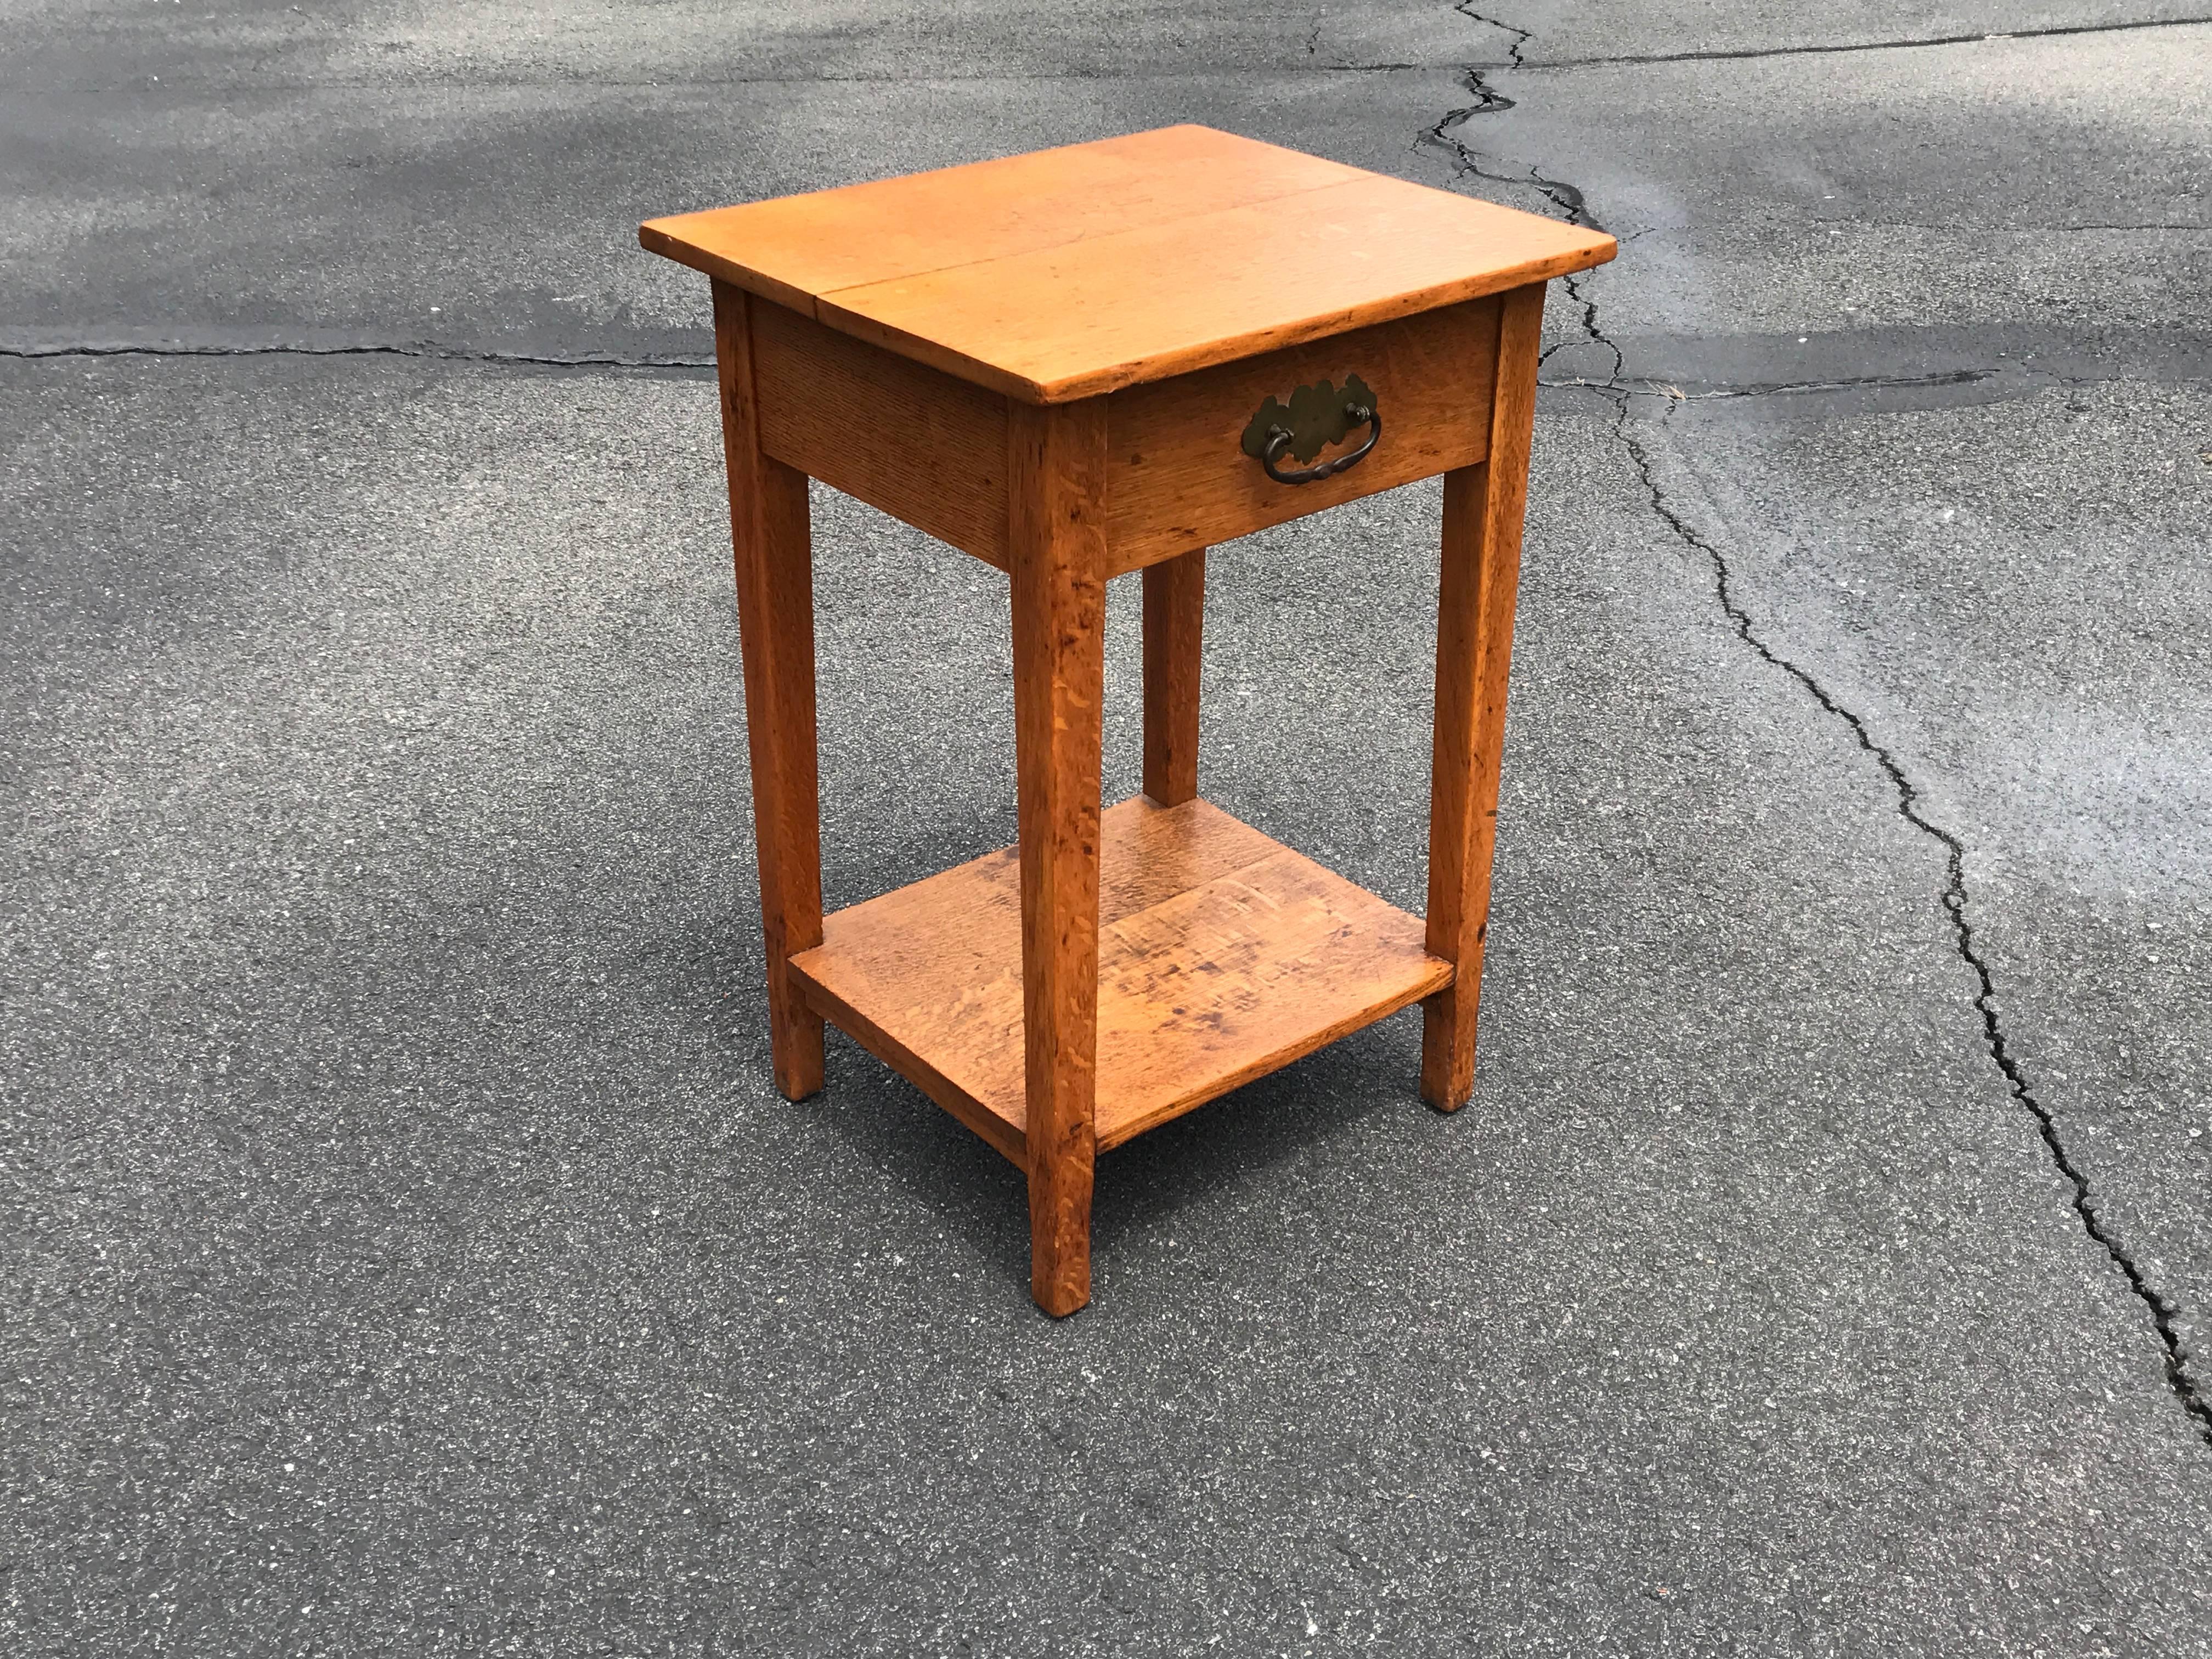 Offered is a gorgeous, 19th century English oak side table with brass hardware.